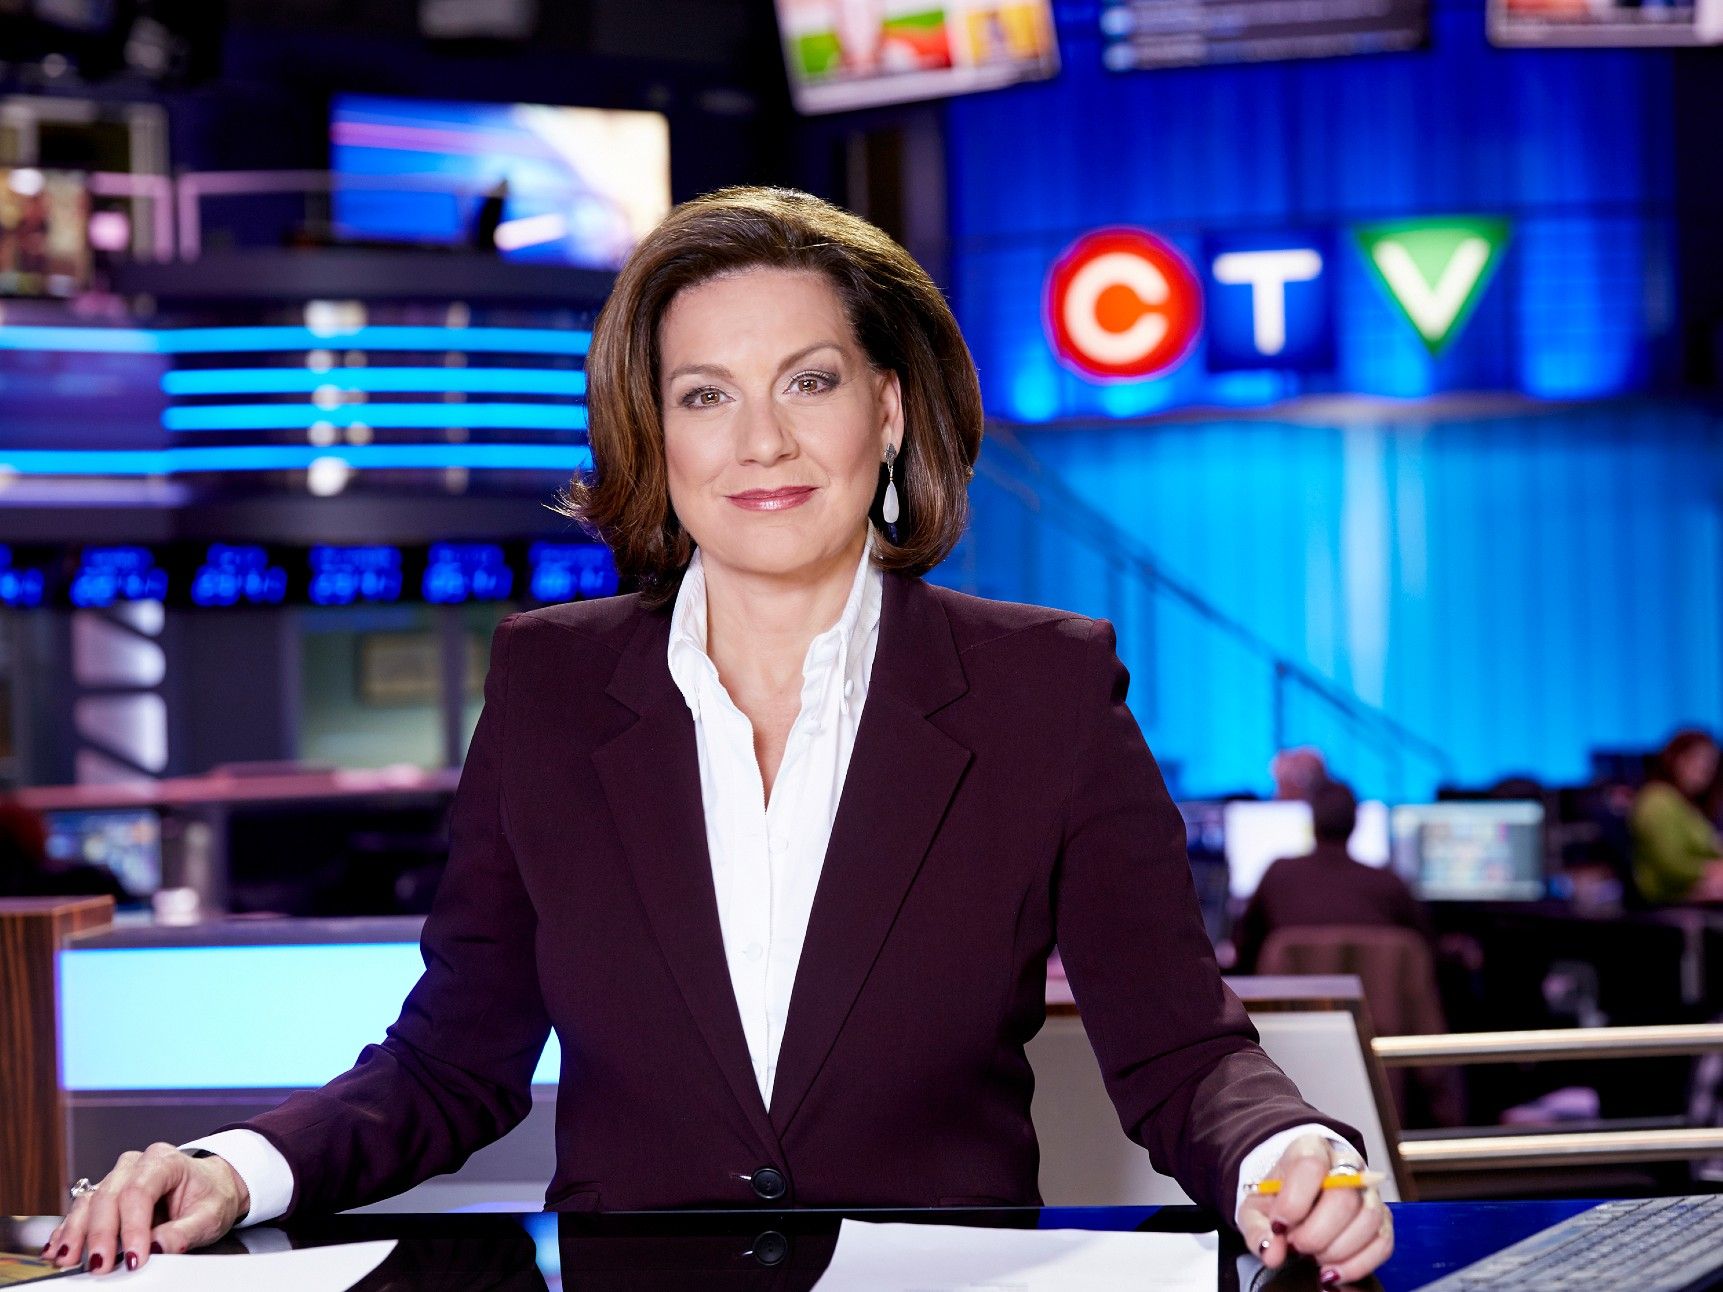 Sabrina Maddeaux: That Lisa LaFlamme's only option may be the CBC is an outrage all its own